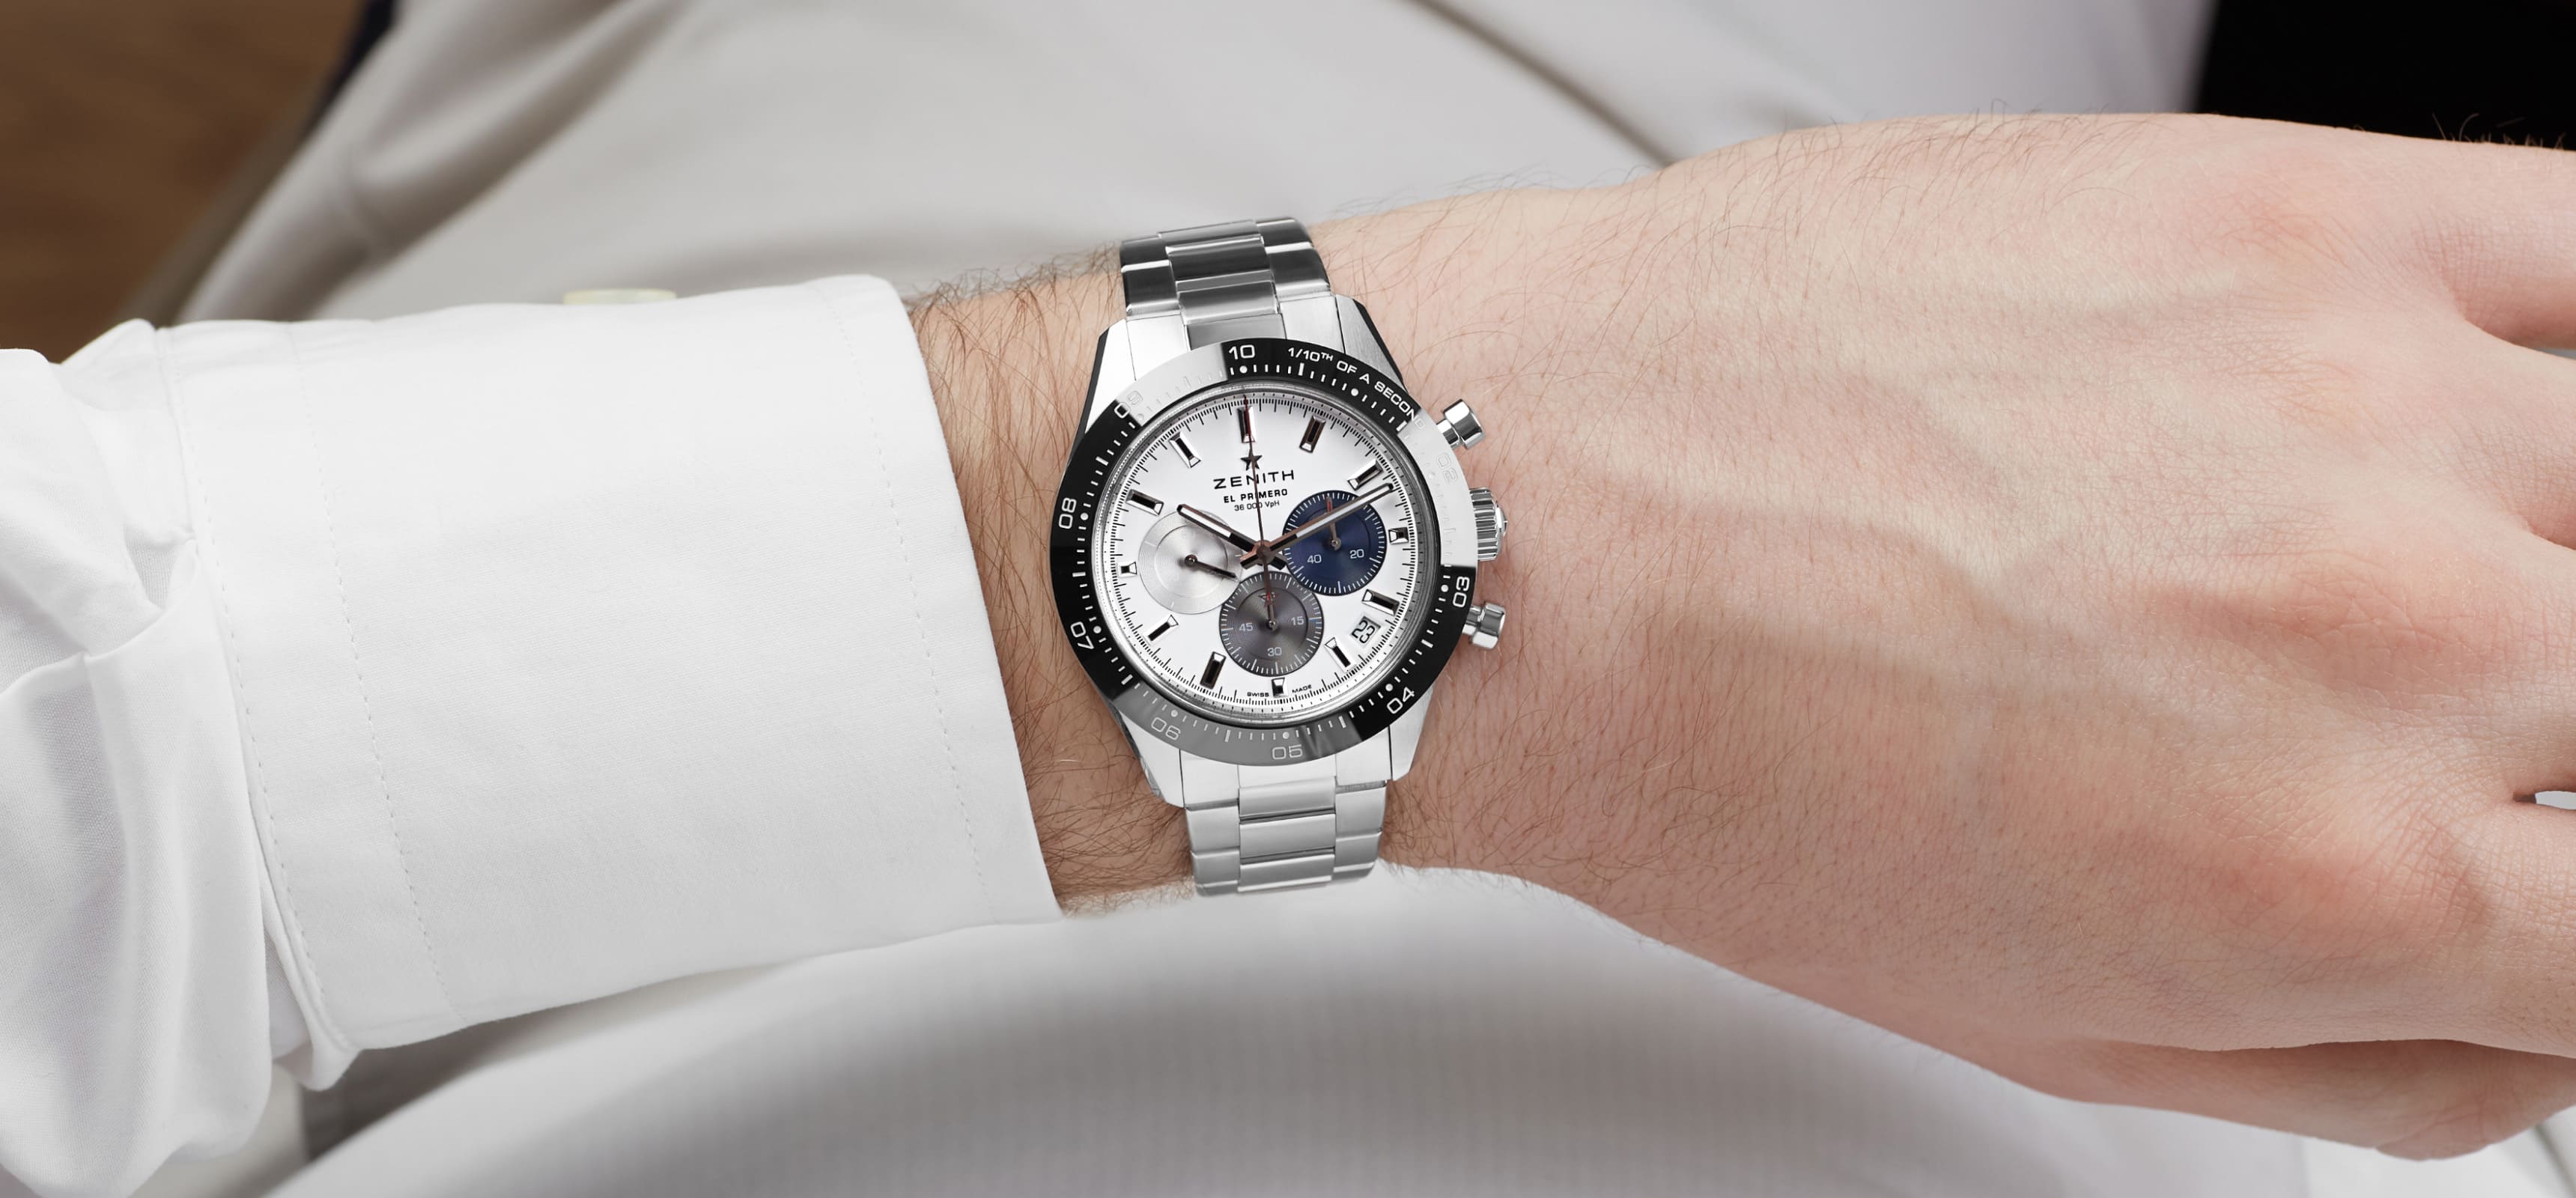 Silver luxury watch on a man's wrist. Rich and shimmering watch approach design.